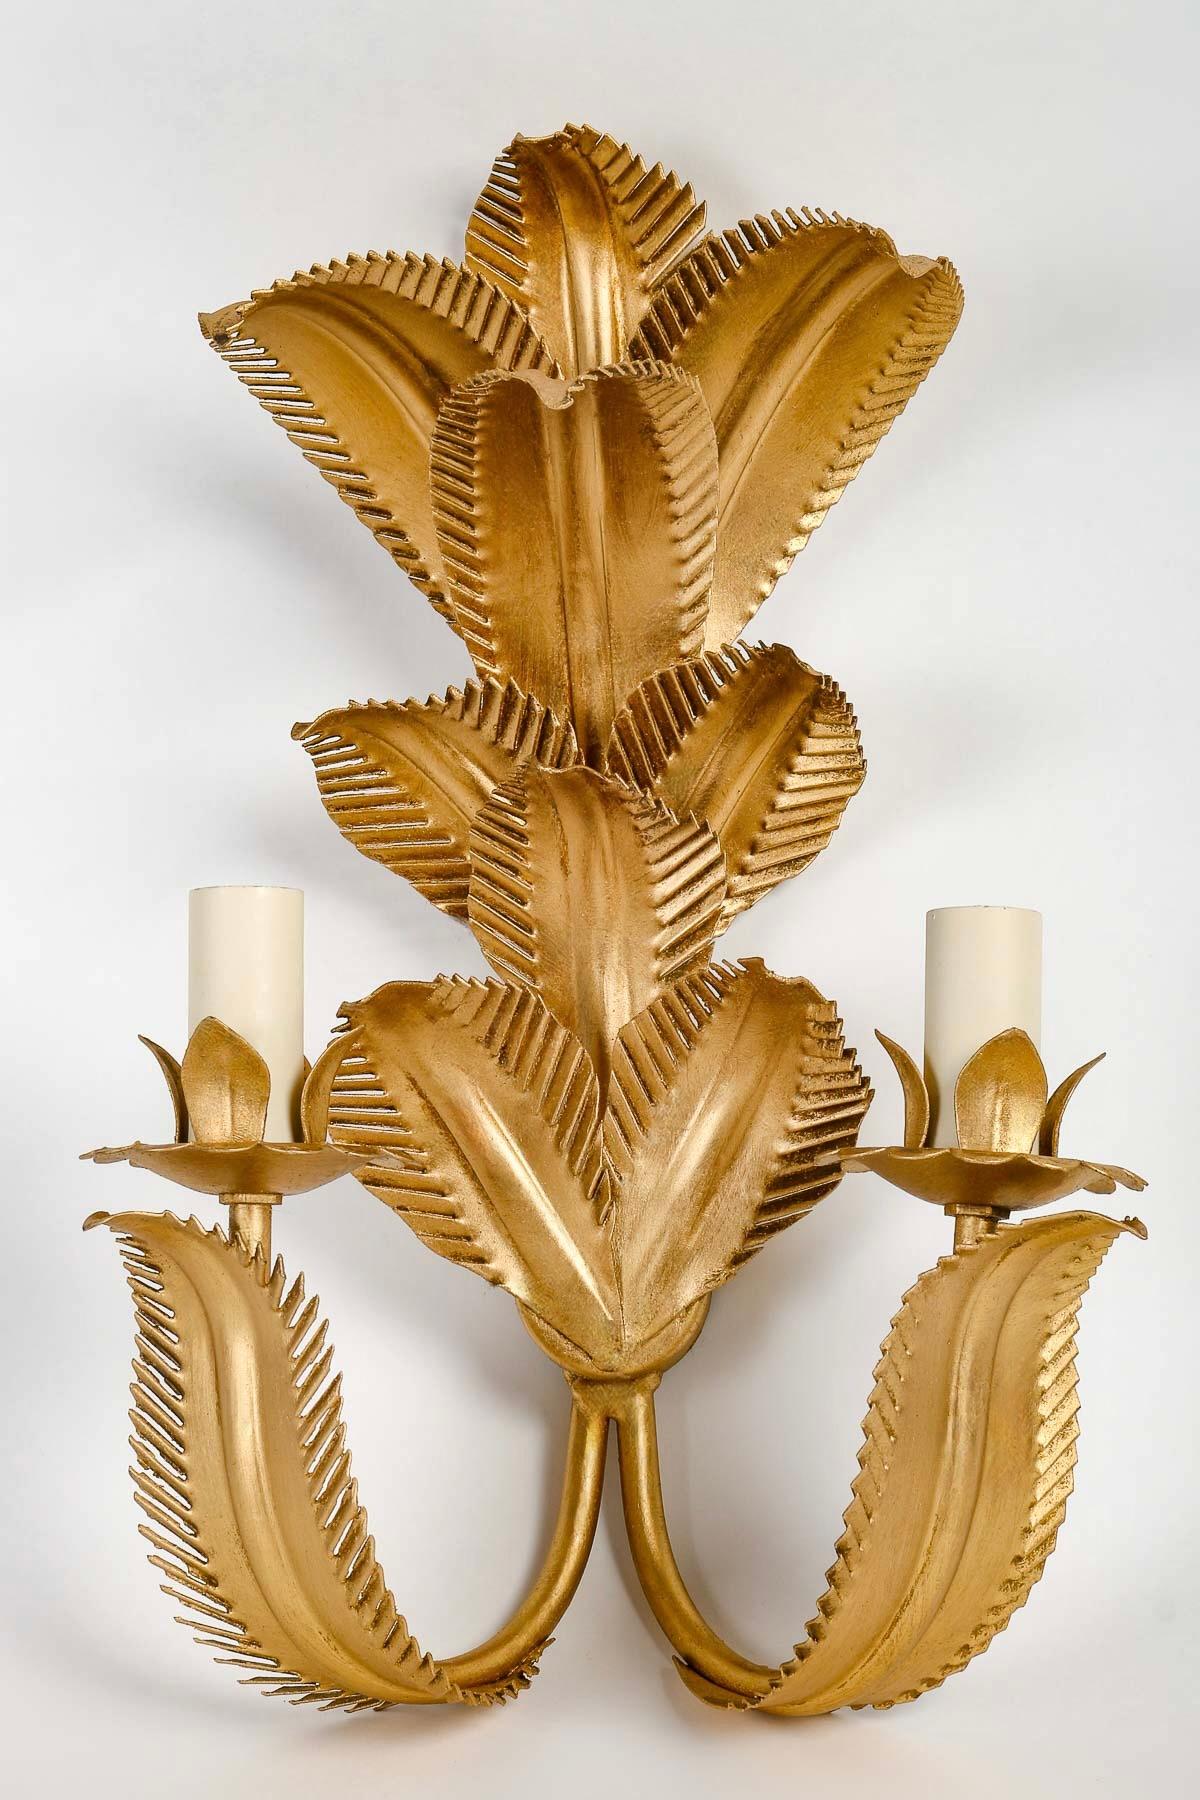 Composed of palm leaves arranged at 3 different heights in gilded metal forming the wall support.
On the lower part of the sconce, two arms of light on either side of the sconce are embellished with foliage and adorned with two illuminating candles